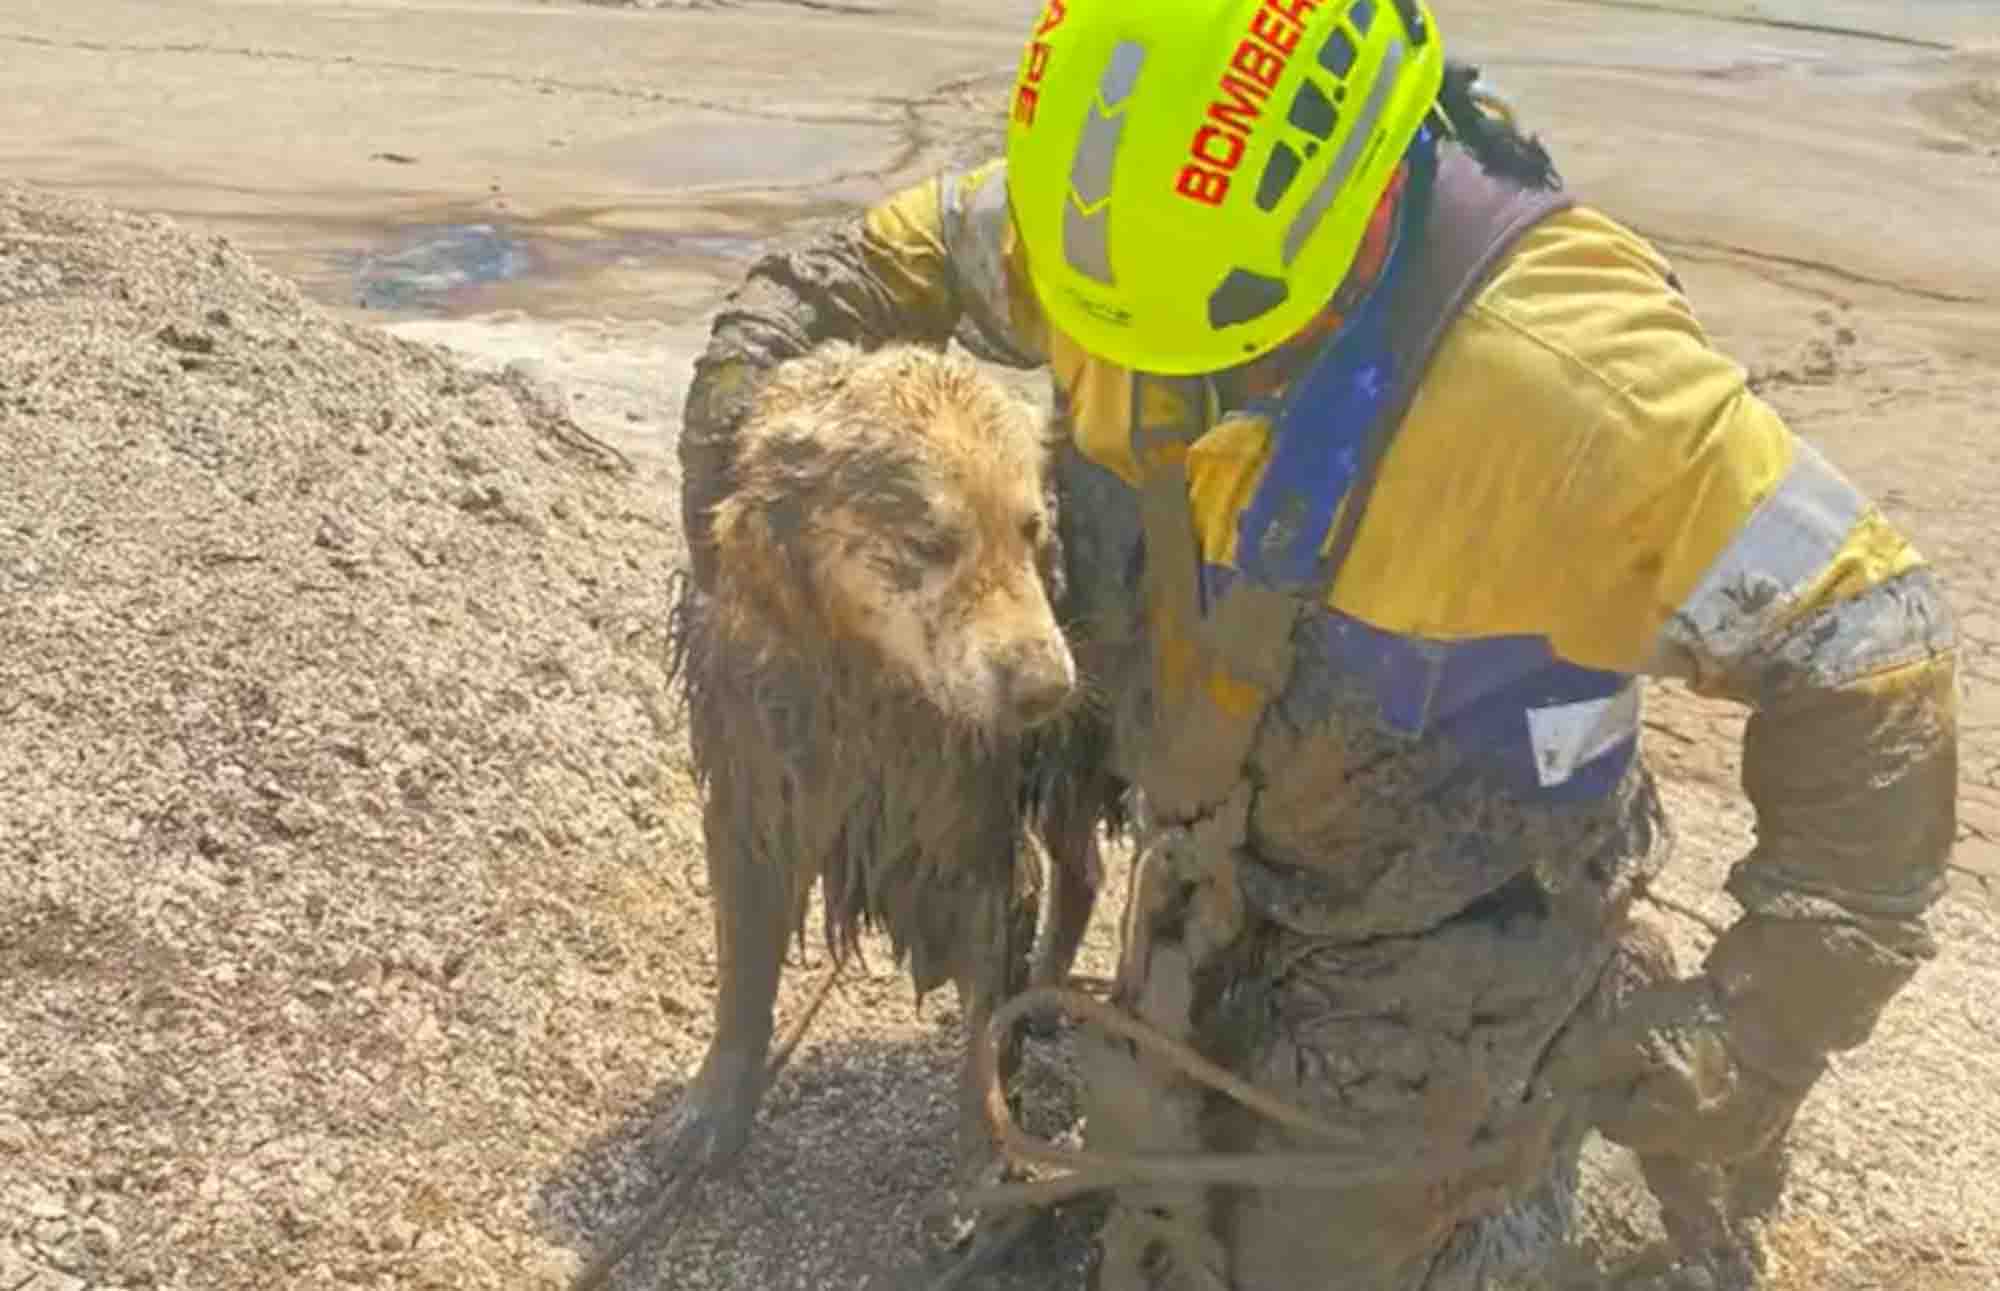 Rescuers Save Dog Traped In Muddy Bog After Chasing Seagulls